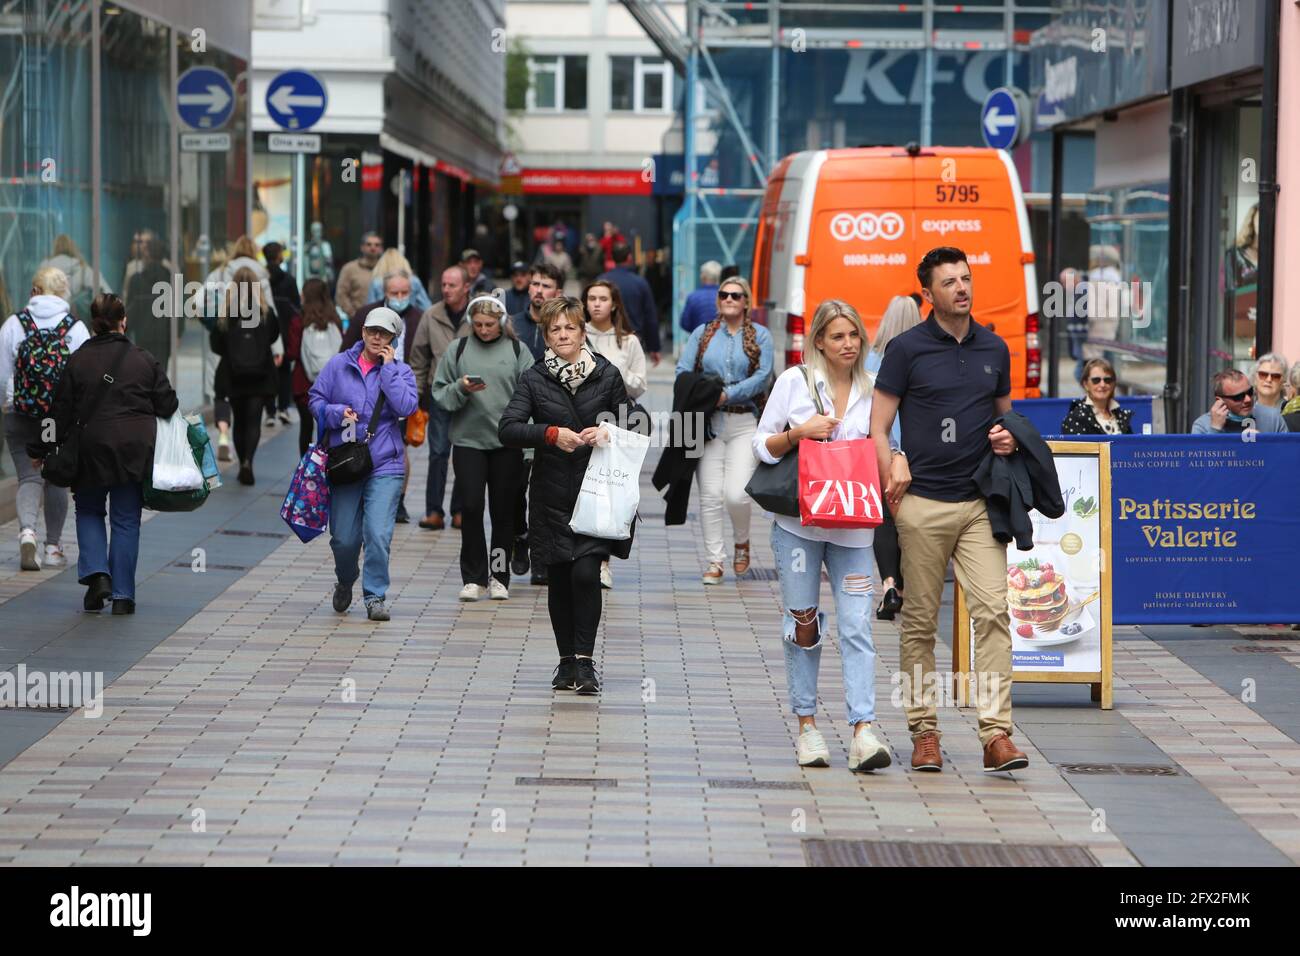 Belfast 25 May 2021.  Shoppers rteurn to Belfast City Centre as shops and business reopen from Covid  lockdown. People in Northern Ireland are now able to enjoy a drink or bite to eat inside pubs and restaurants, as hospitality opens fully for the first time since December. Six people from any number of households can sit together or up to 10 people provided they are all from the same household. The easing of coronavirus restrictions also means six people from two households can now meet indoors in homes. Credit: Paul McErlane/Alamy Live News Stock Photo